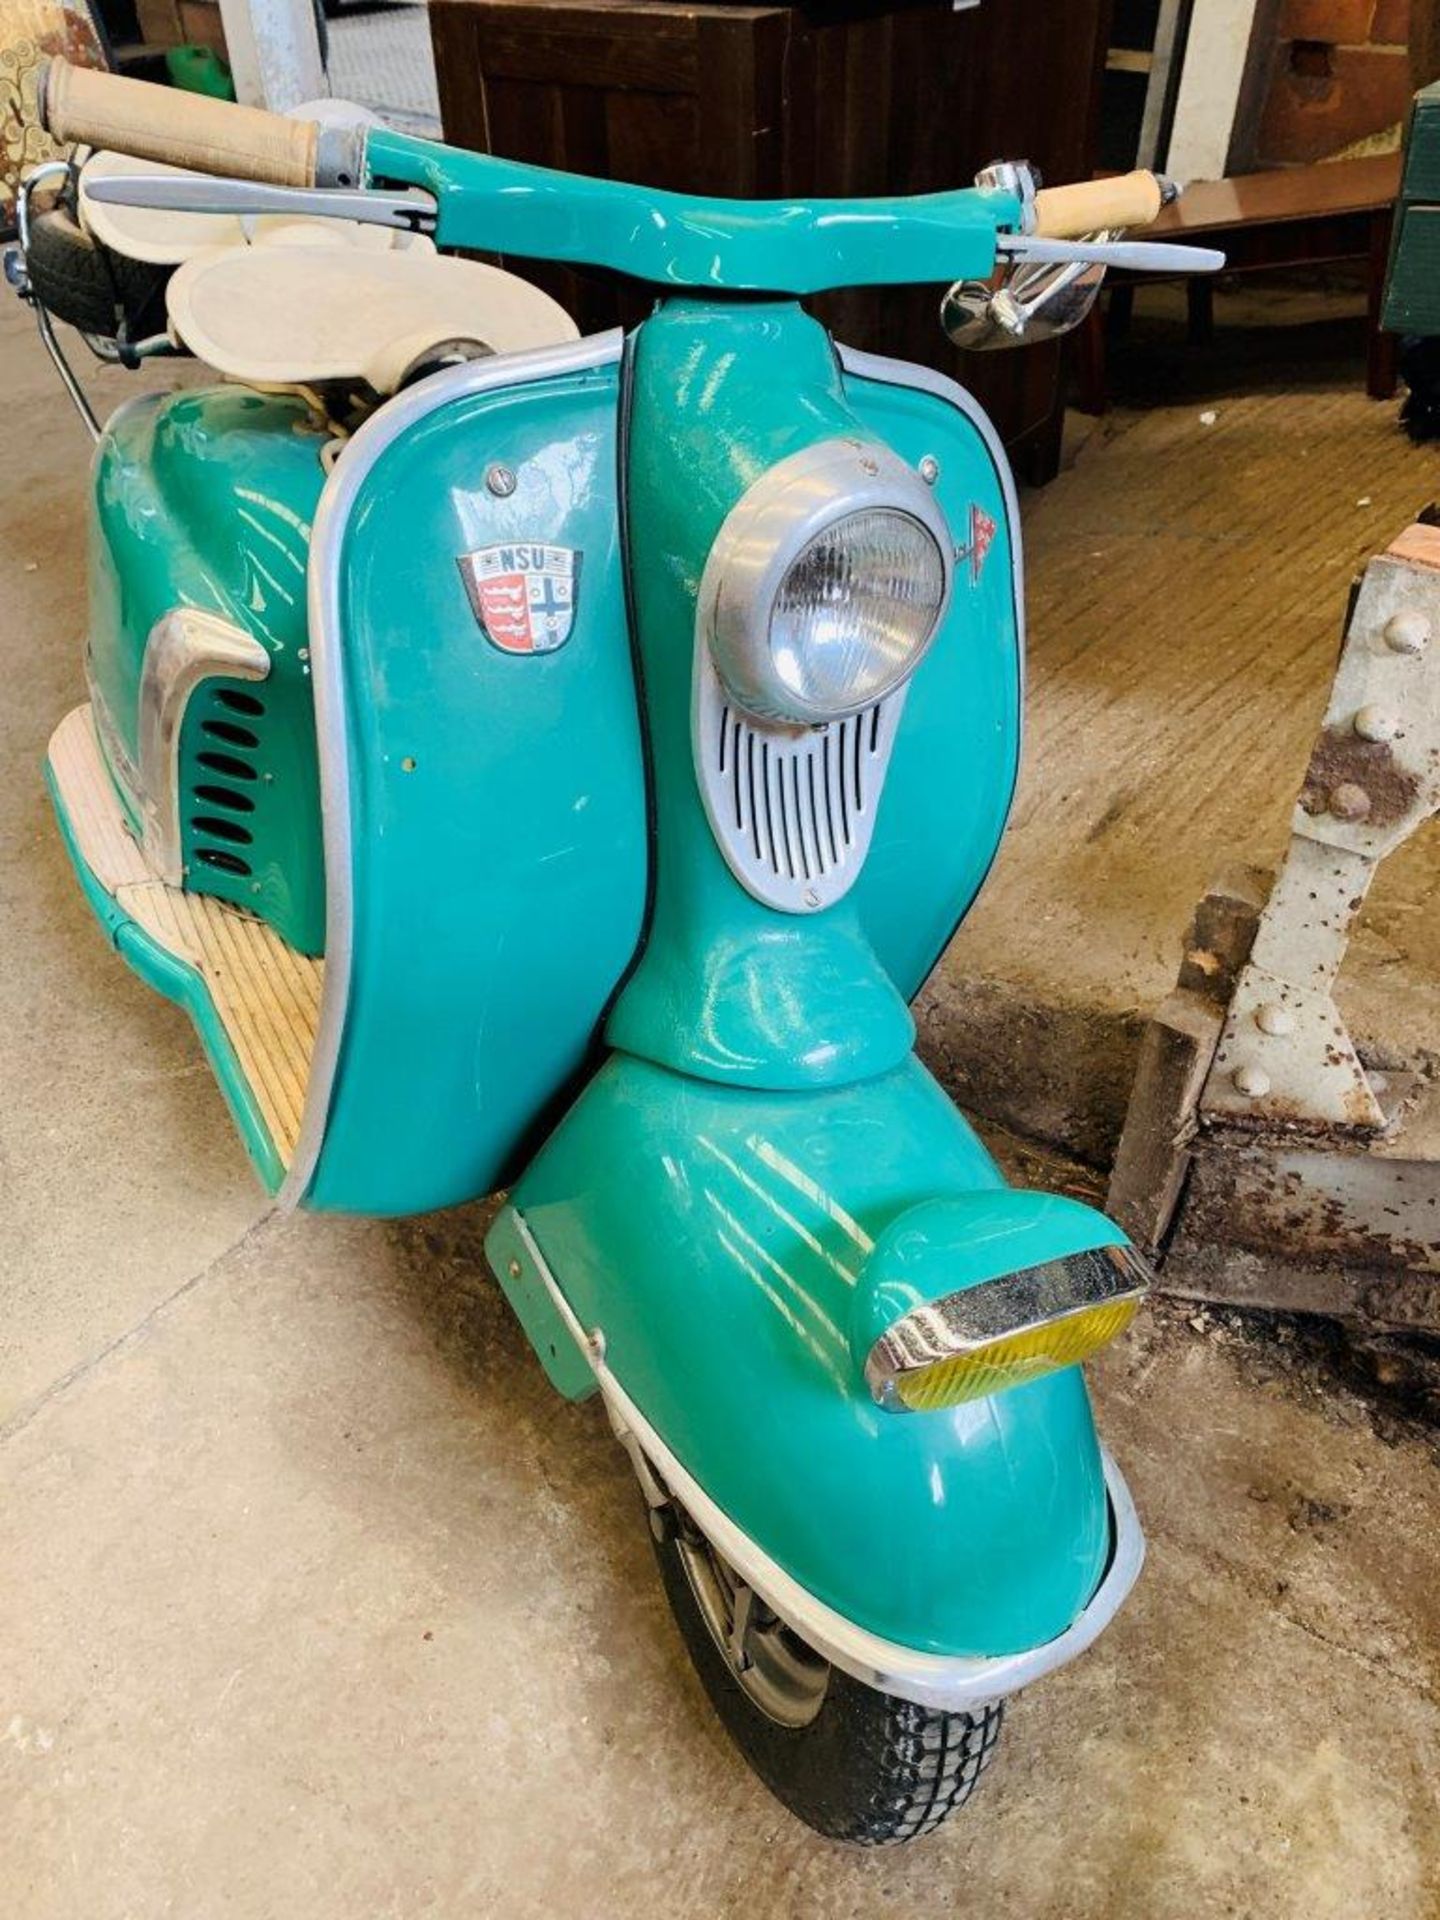 1958 NSU Prima V Scooter. This lot is being sold by Order of The Official Receiver. - Image 7 of 7